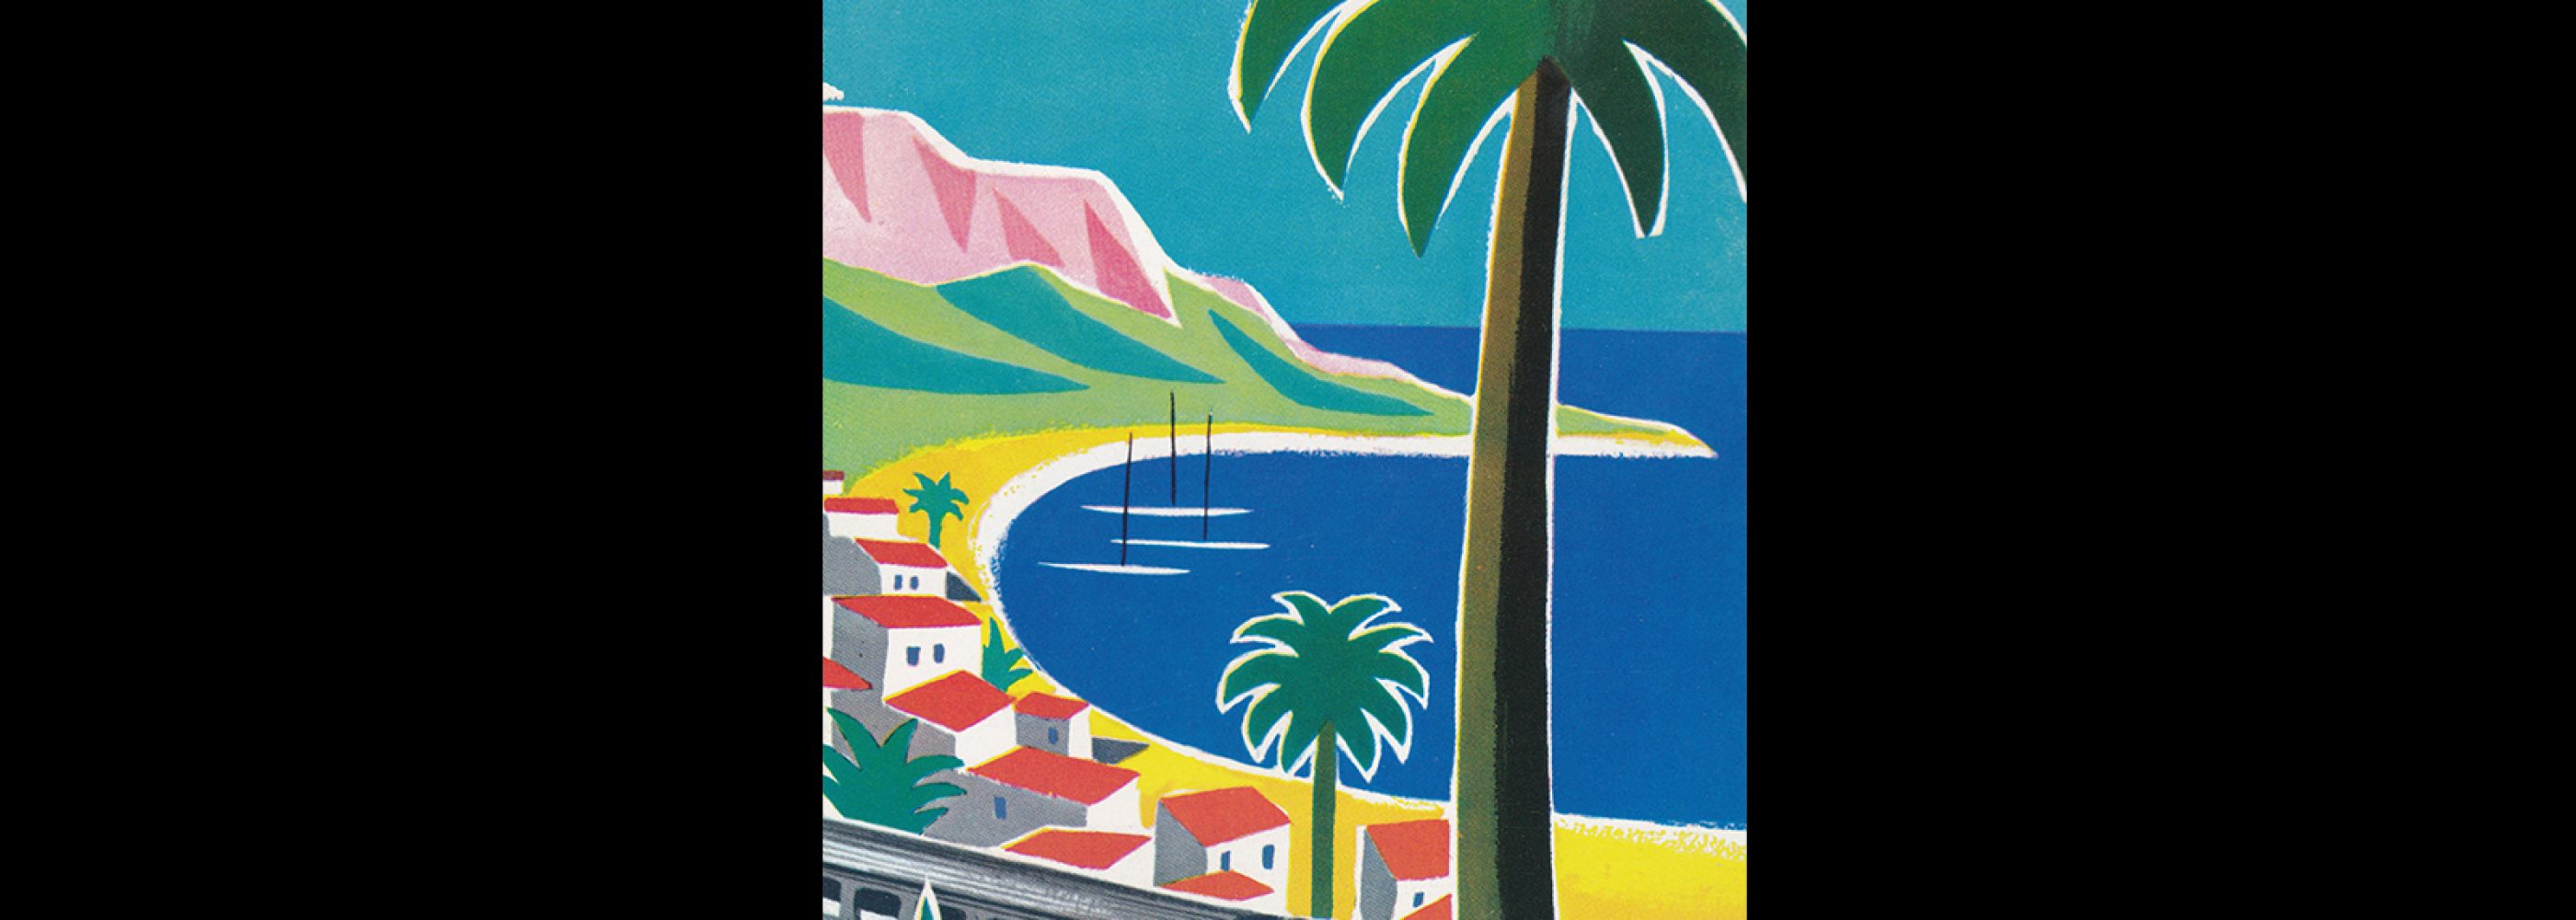 France Cote D'Azur - Corsica French Railways, 1960 designed by Guy Georget